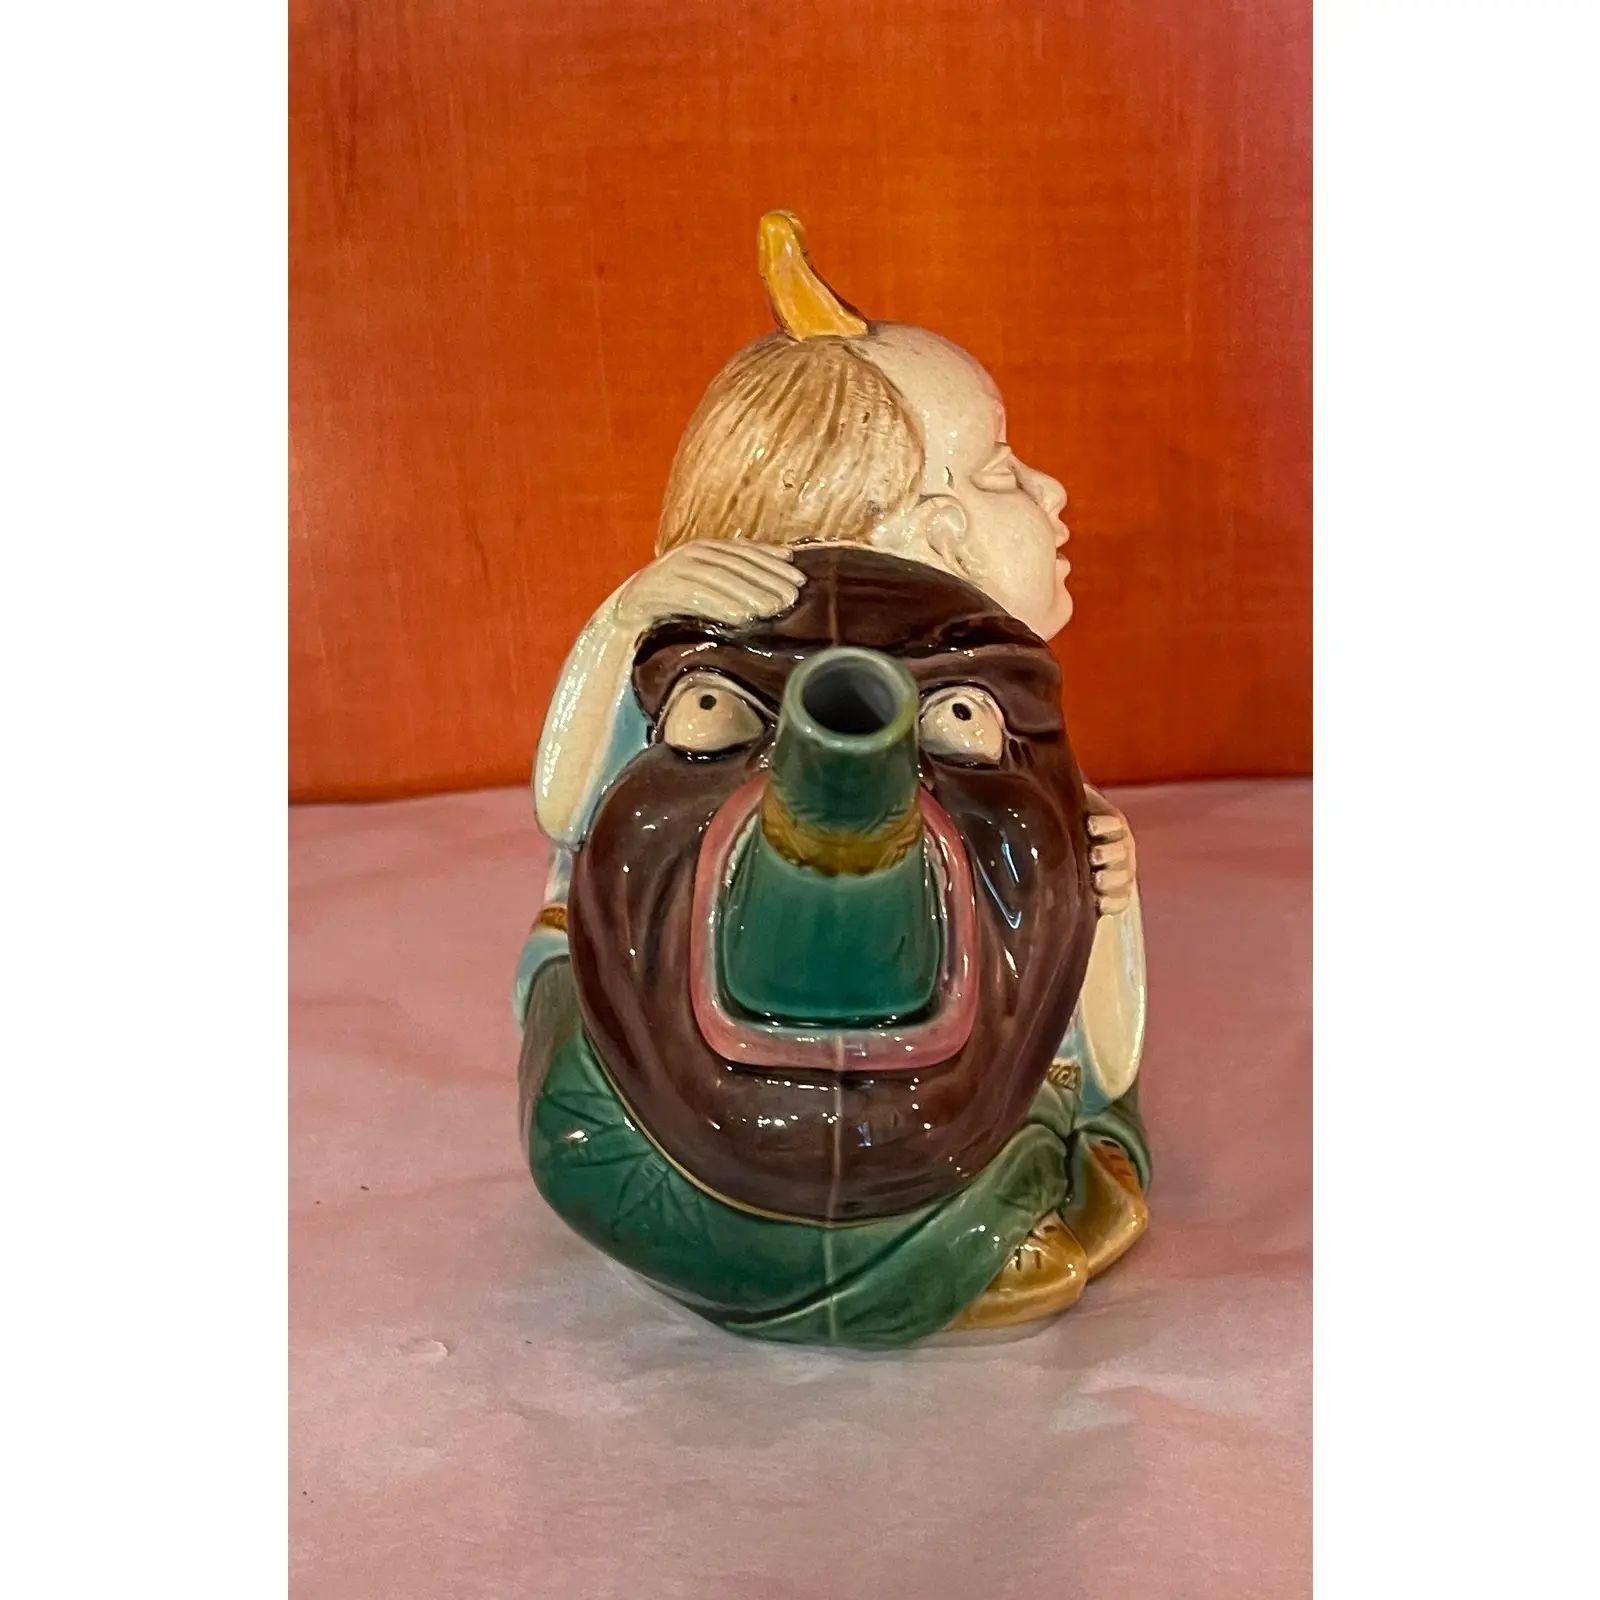 19th-Century Majolica Minton Chinese man figural teapot. It is wonderfully whimsical and features a Chinese man form with excellent coloring.

Additional information: 
Materials: pottery.
Color: turquoise.
Brand: Minton.
Period: 19th